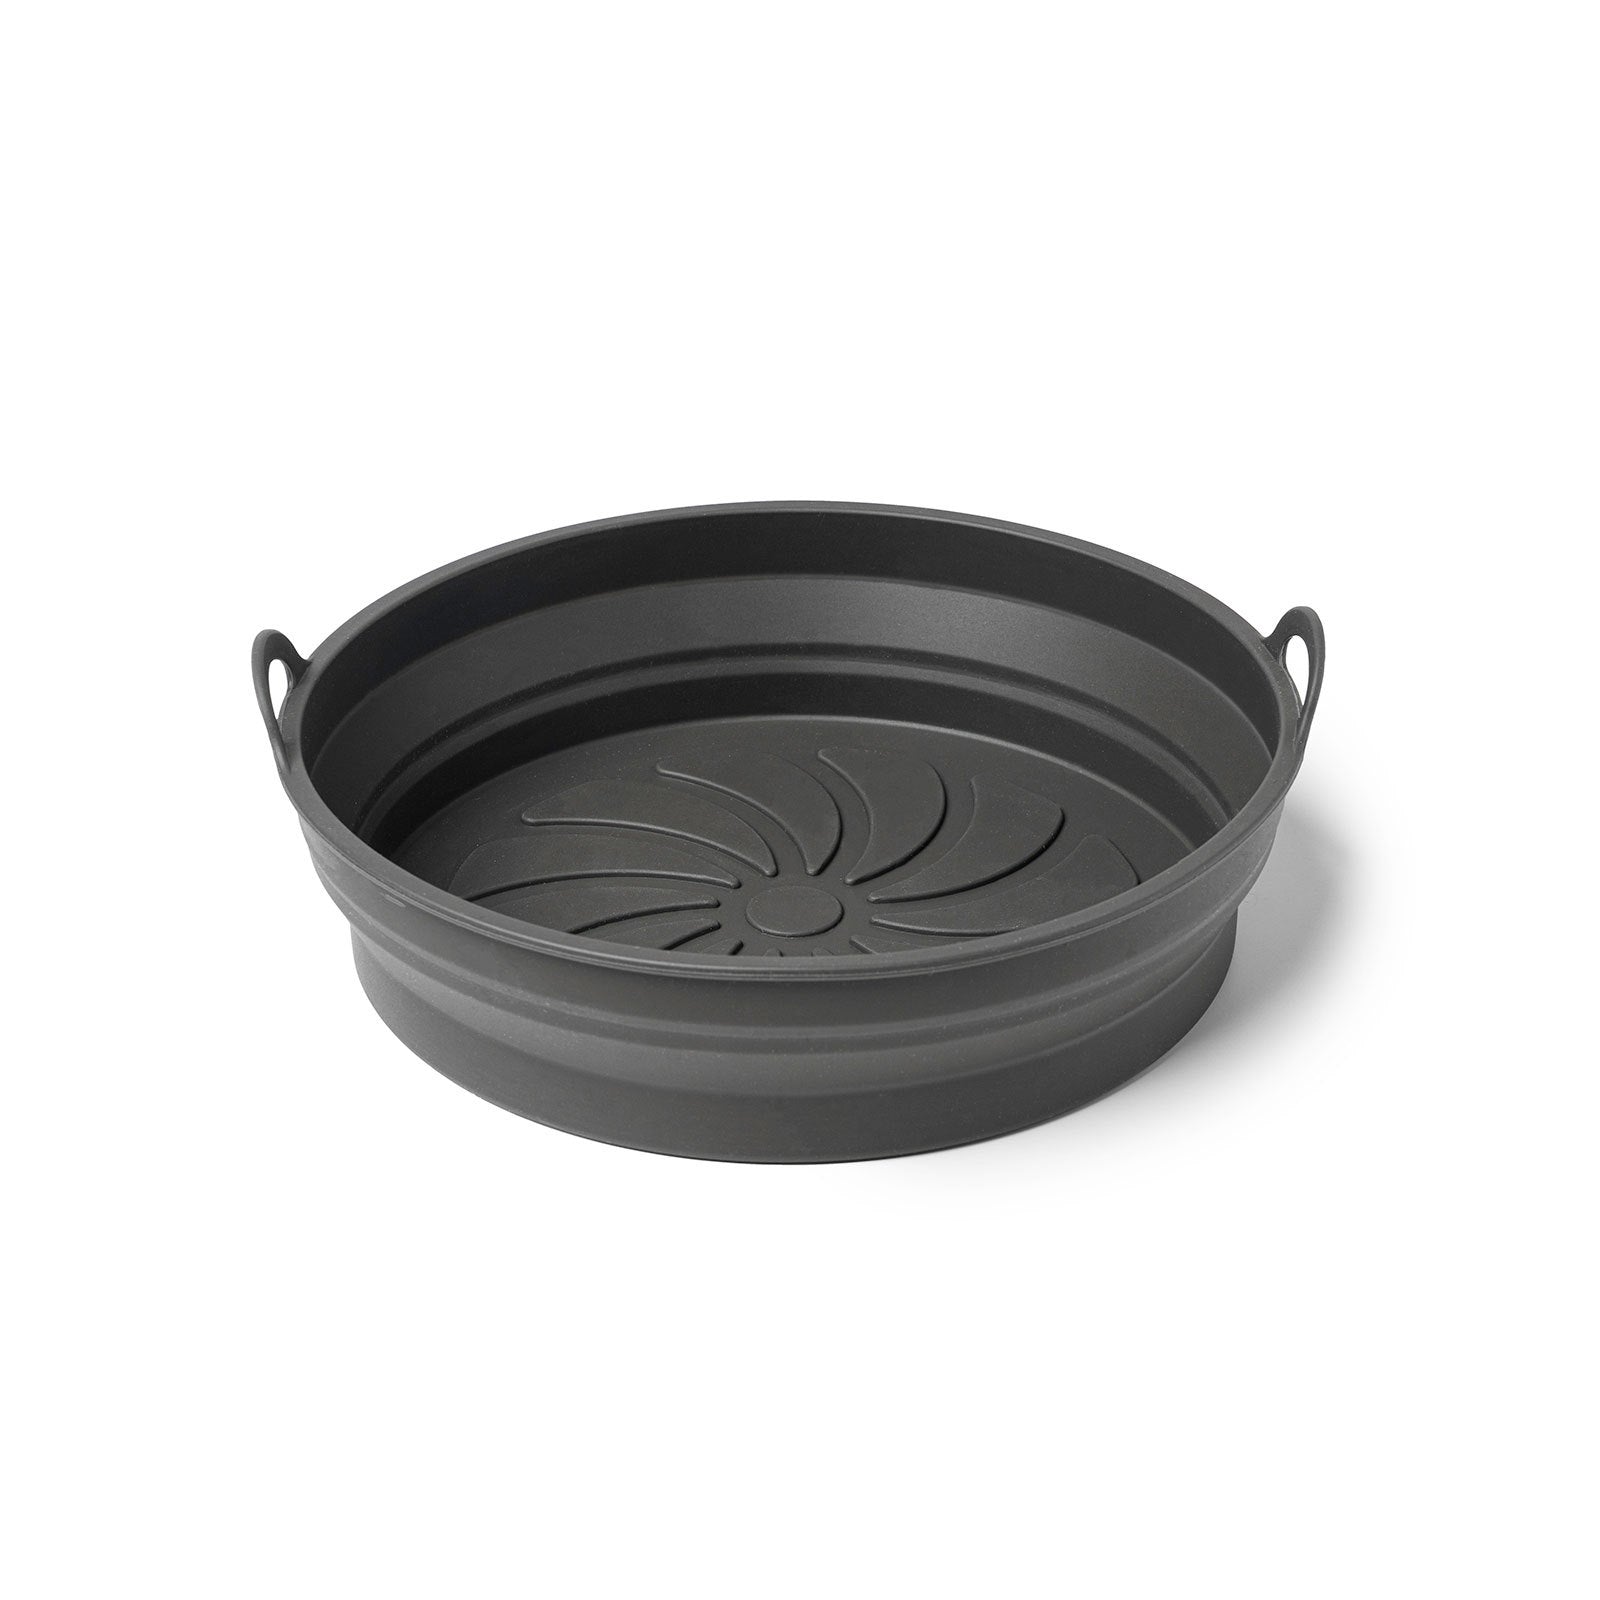 Krumbs Kitchen Black Silicone Collapsible Lunch Container